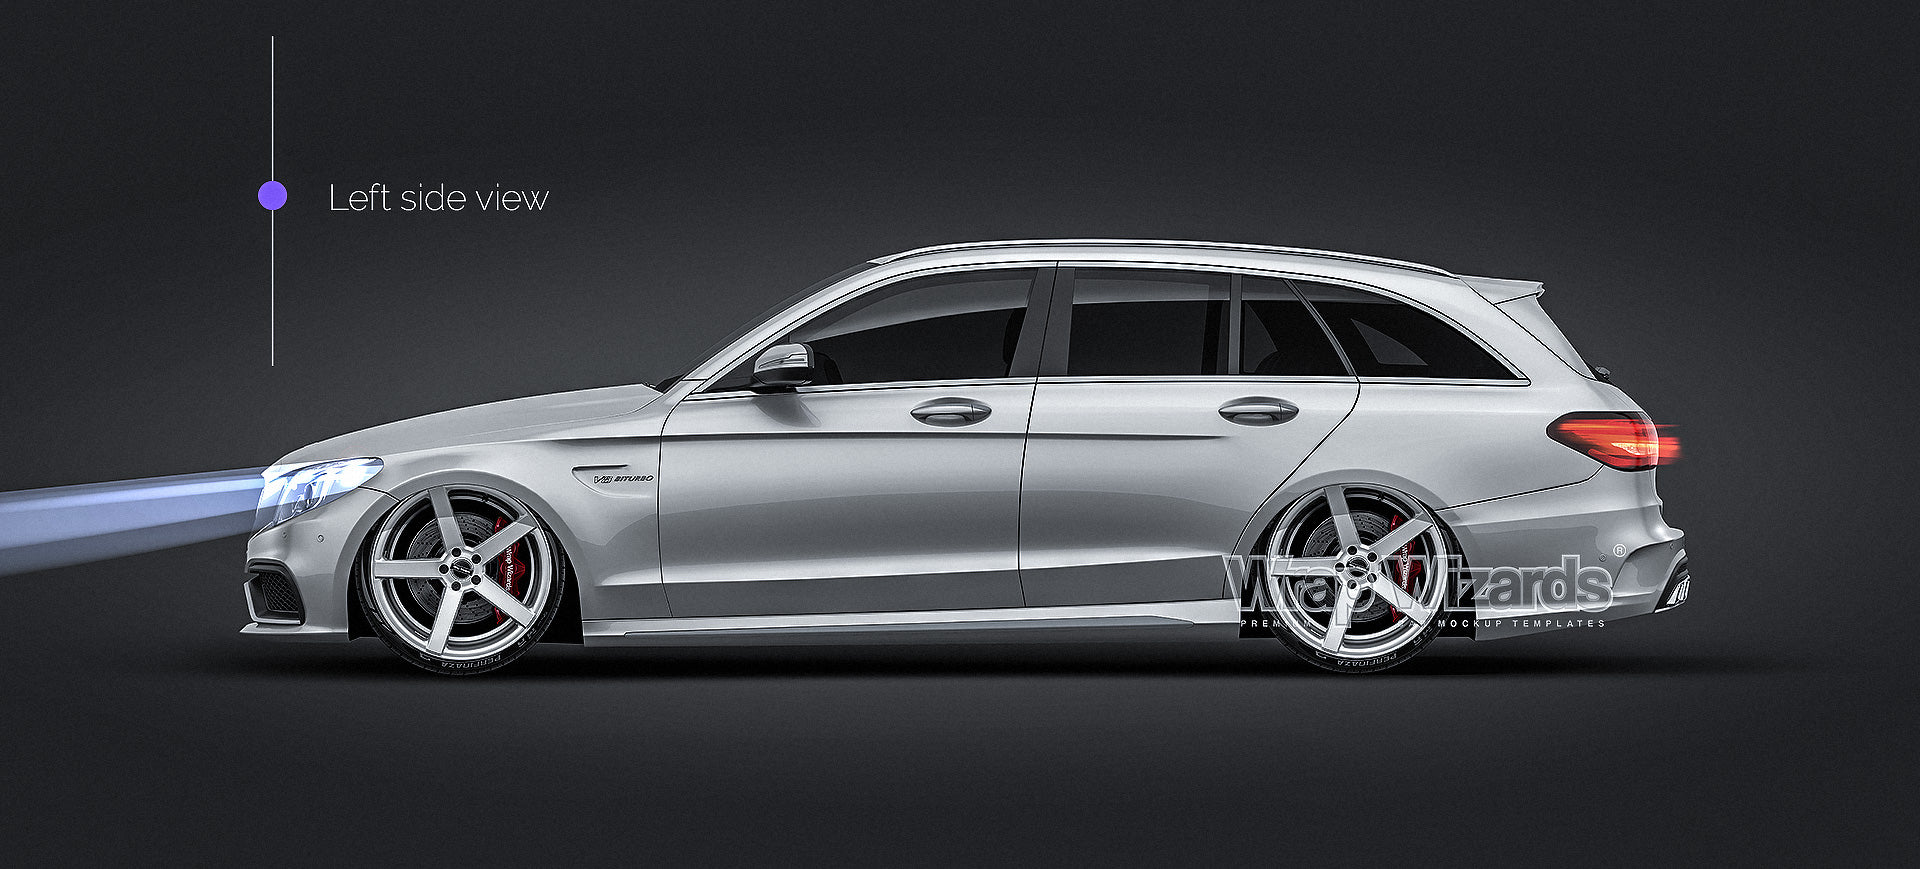 Mercedes-Benz C63 AMG W205 Estate 2015 glossy finish - all sides Car Mockup Template.psd